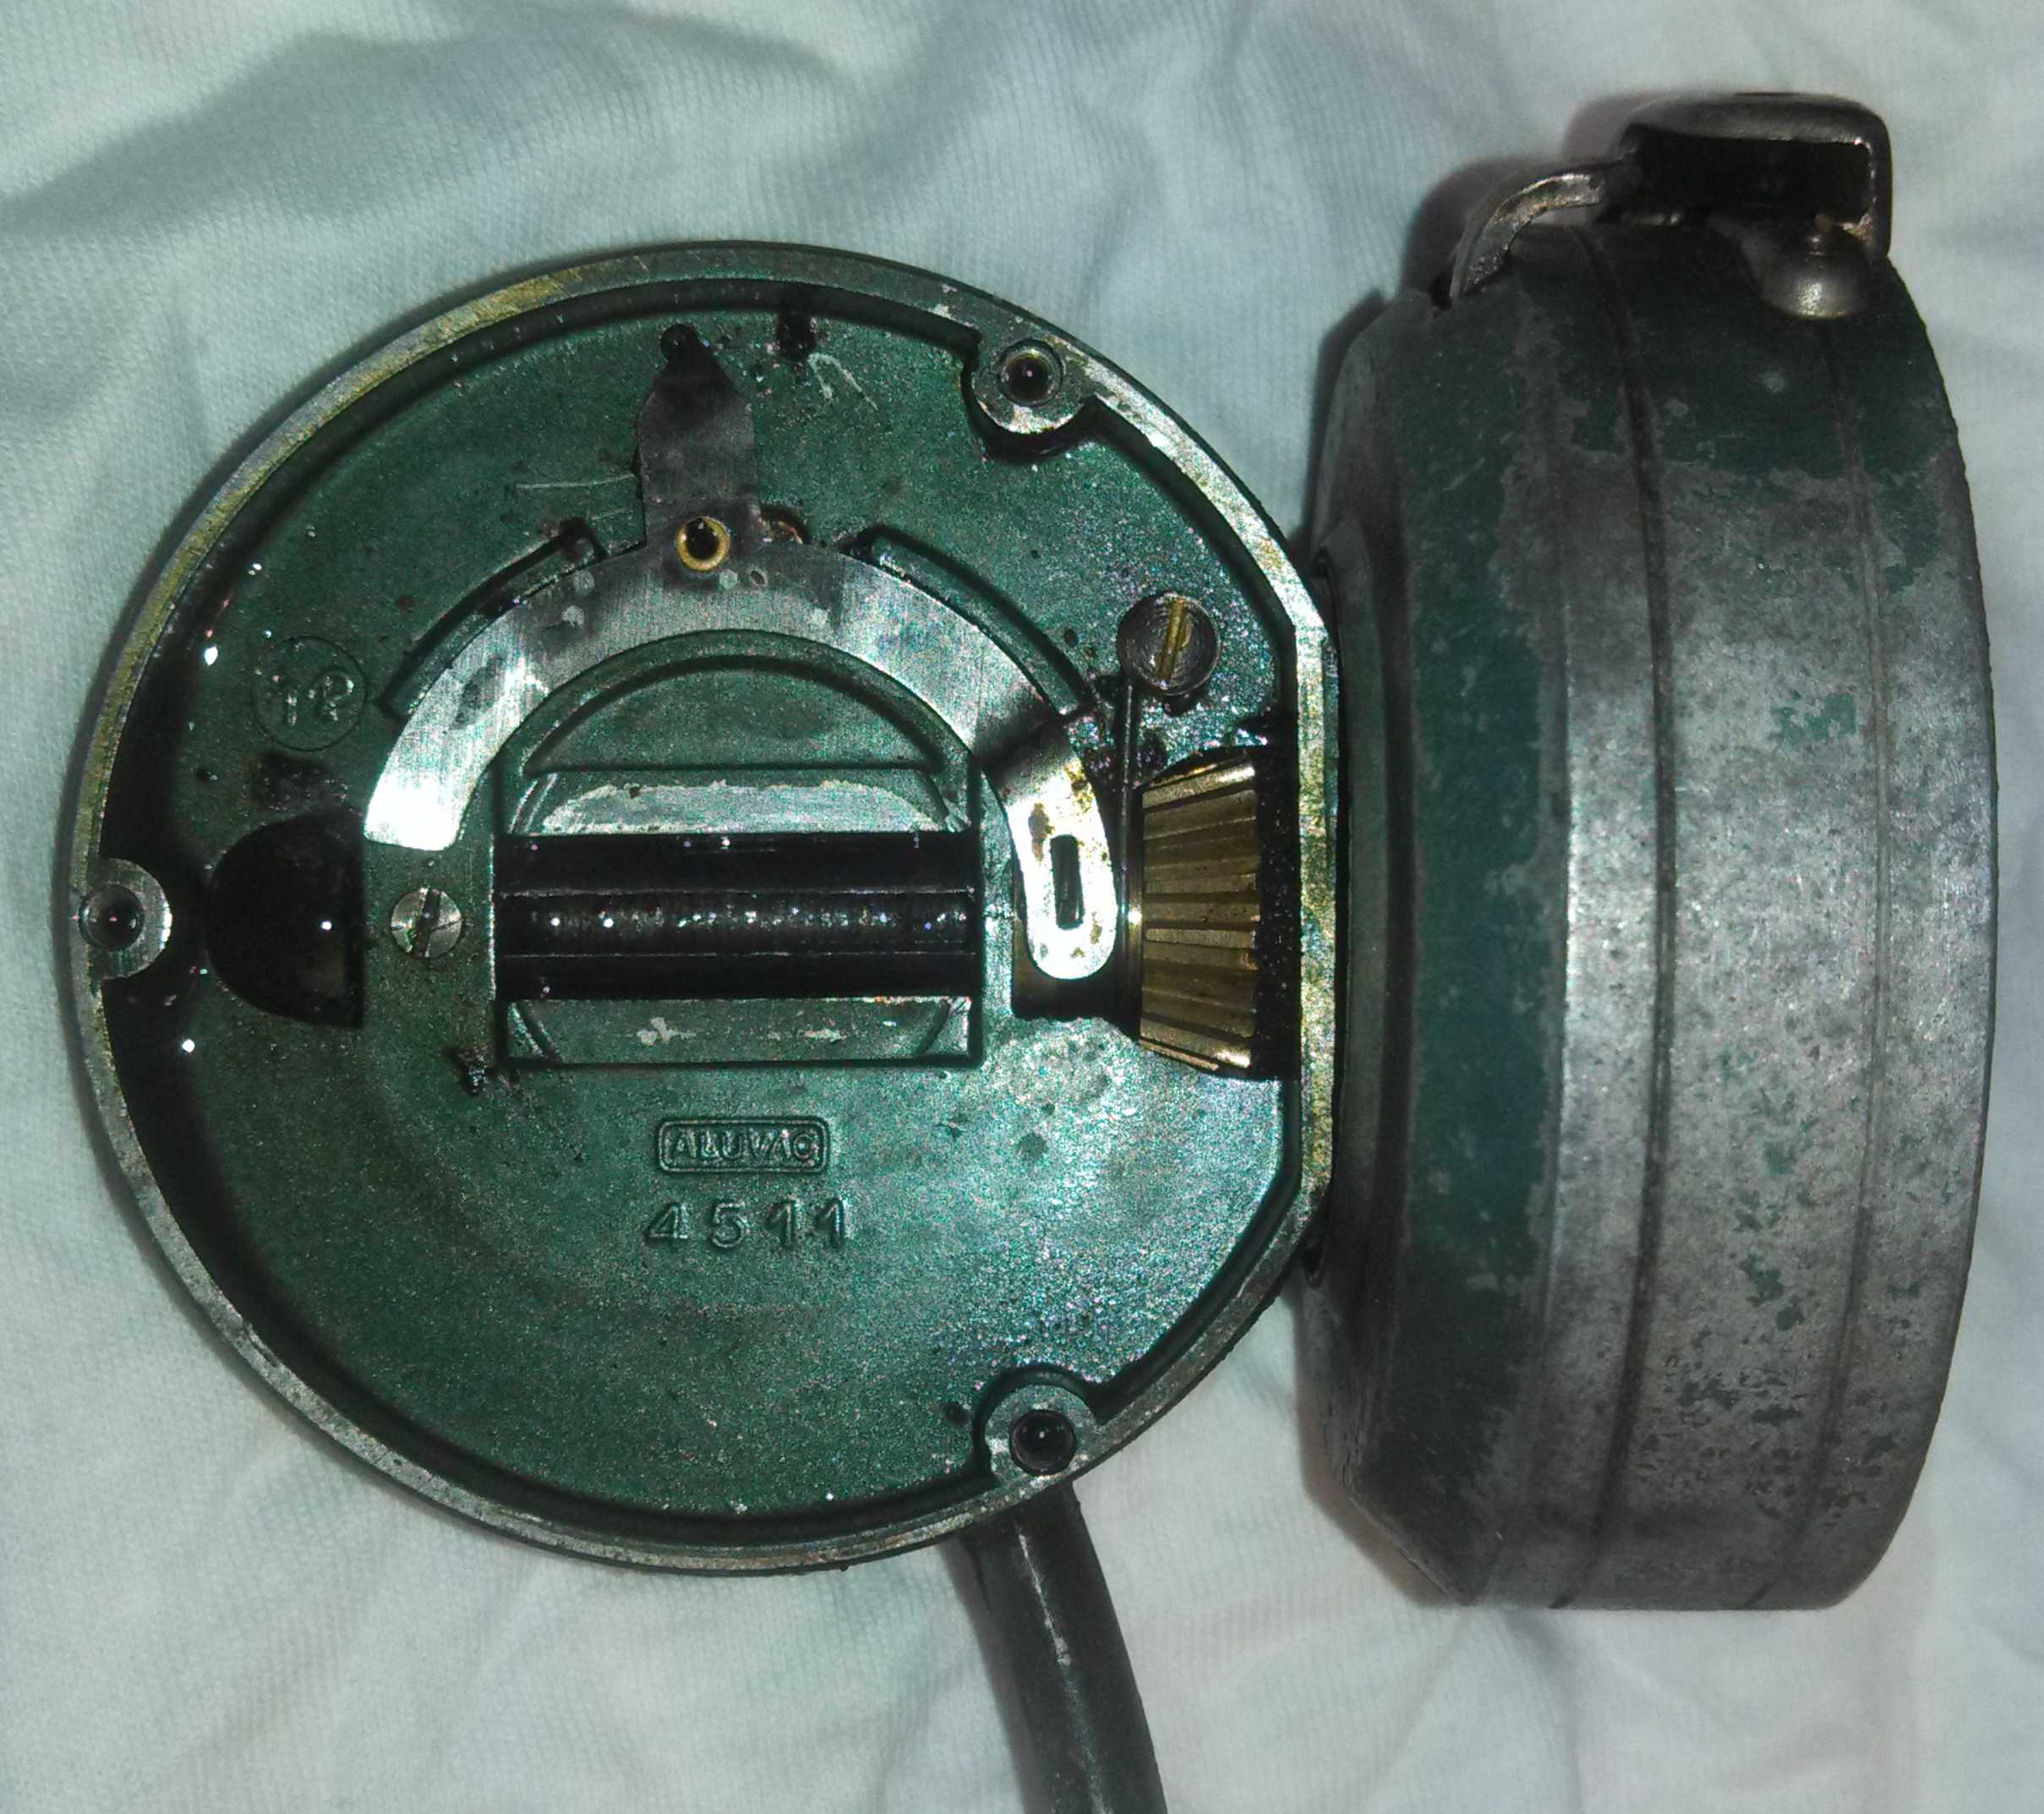 Luxor Saumon vintage spin fishing reel take apart and service